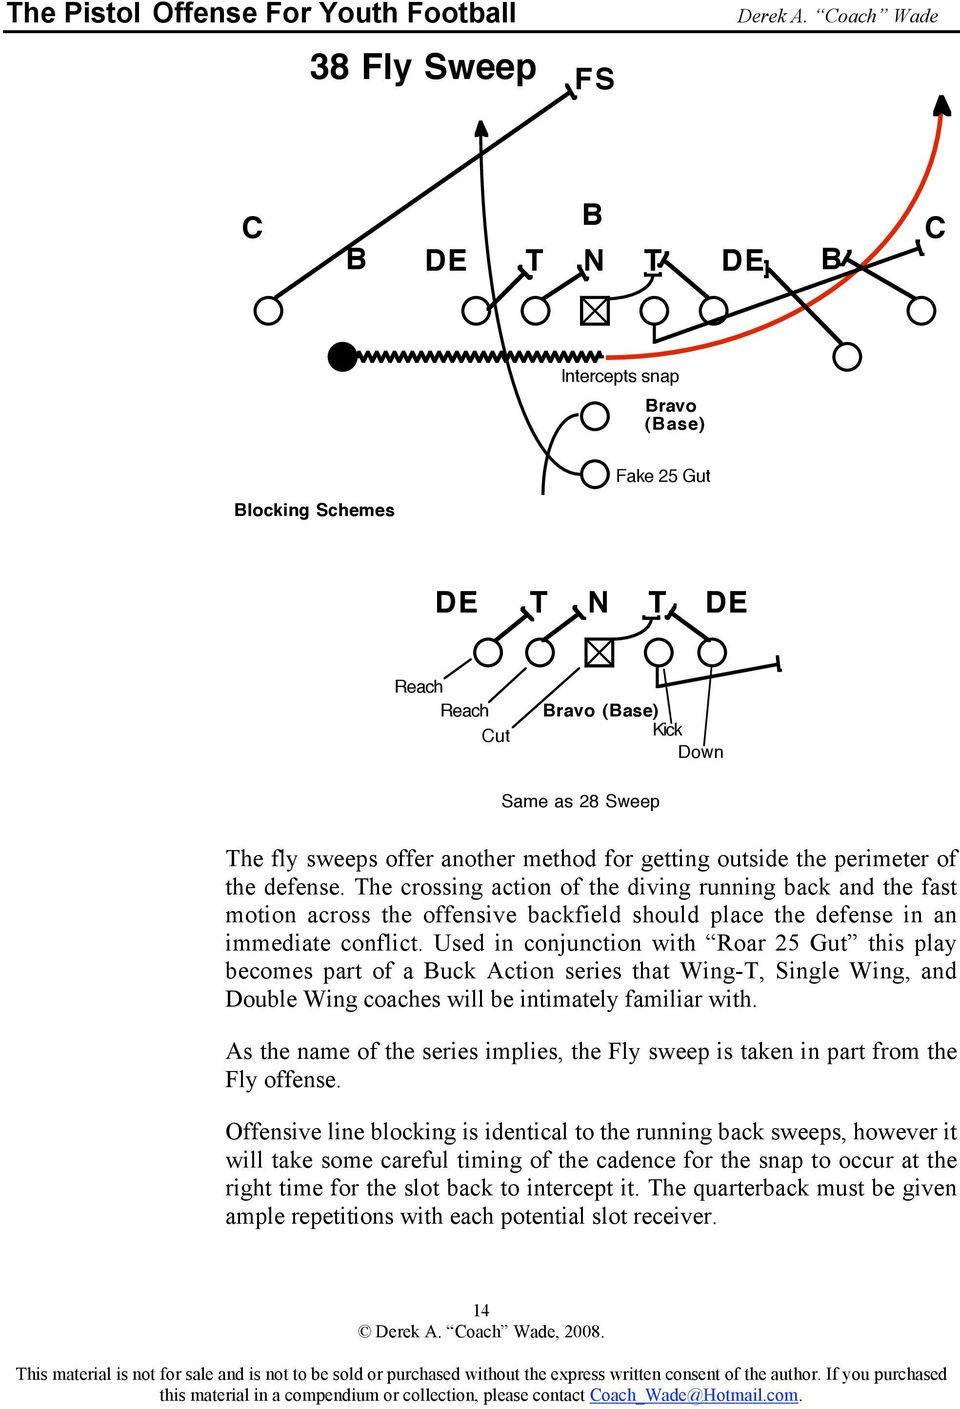 Wing t offense playbook pdf